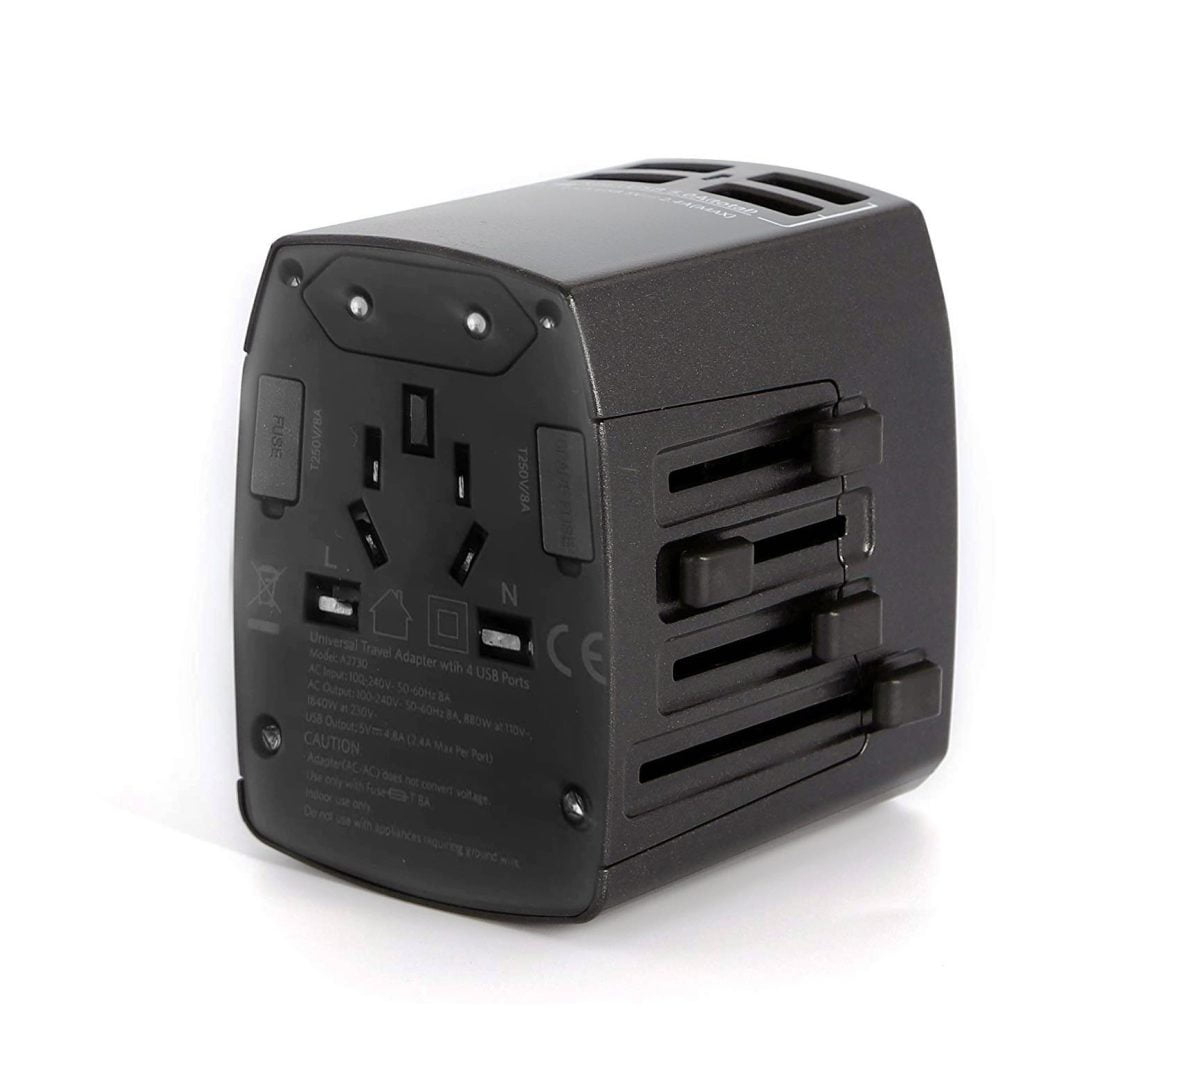 Anker Universal Travel Adapter With 4 Usb Ports – Black